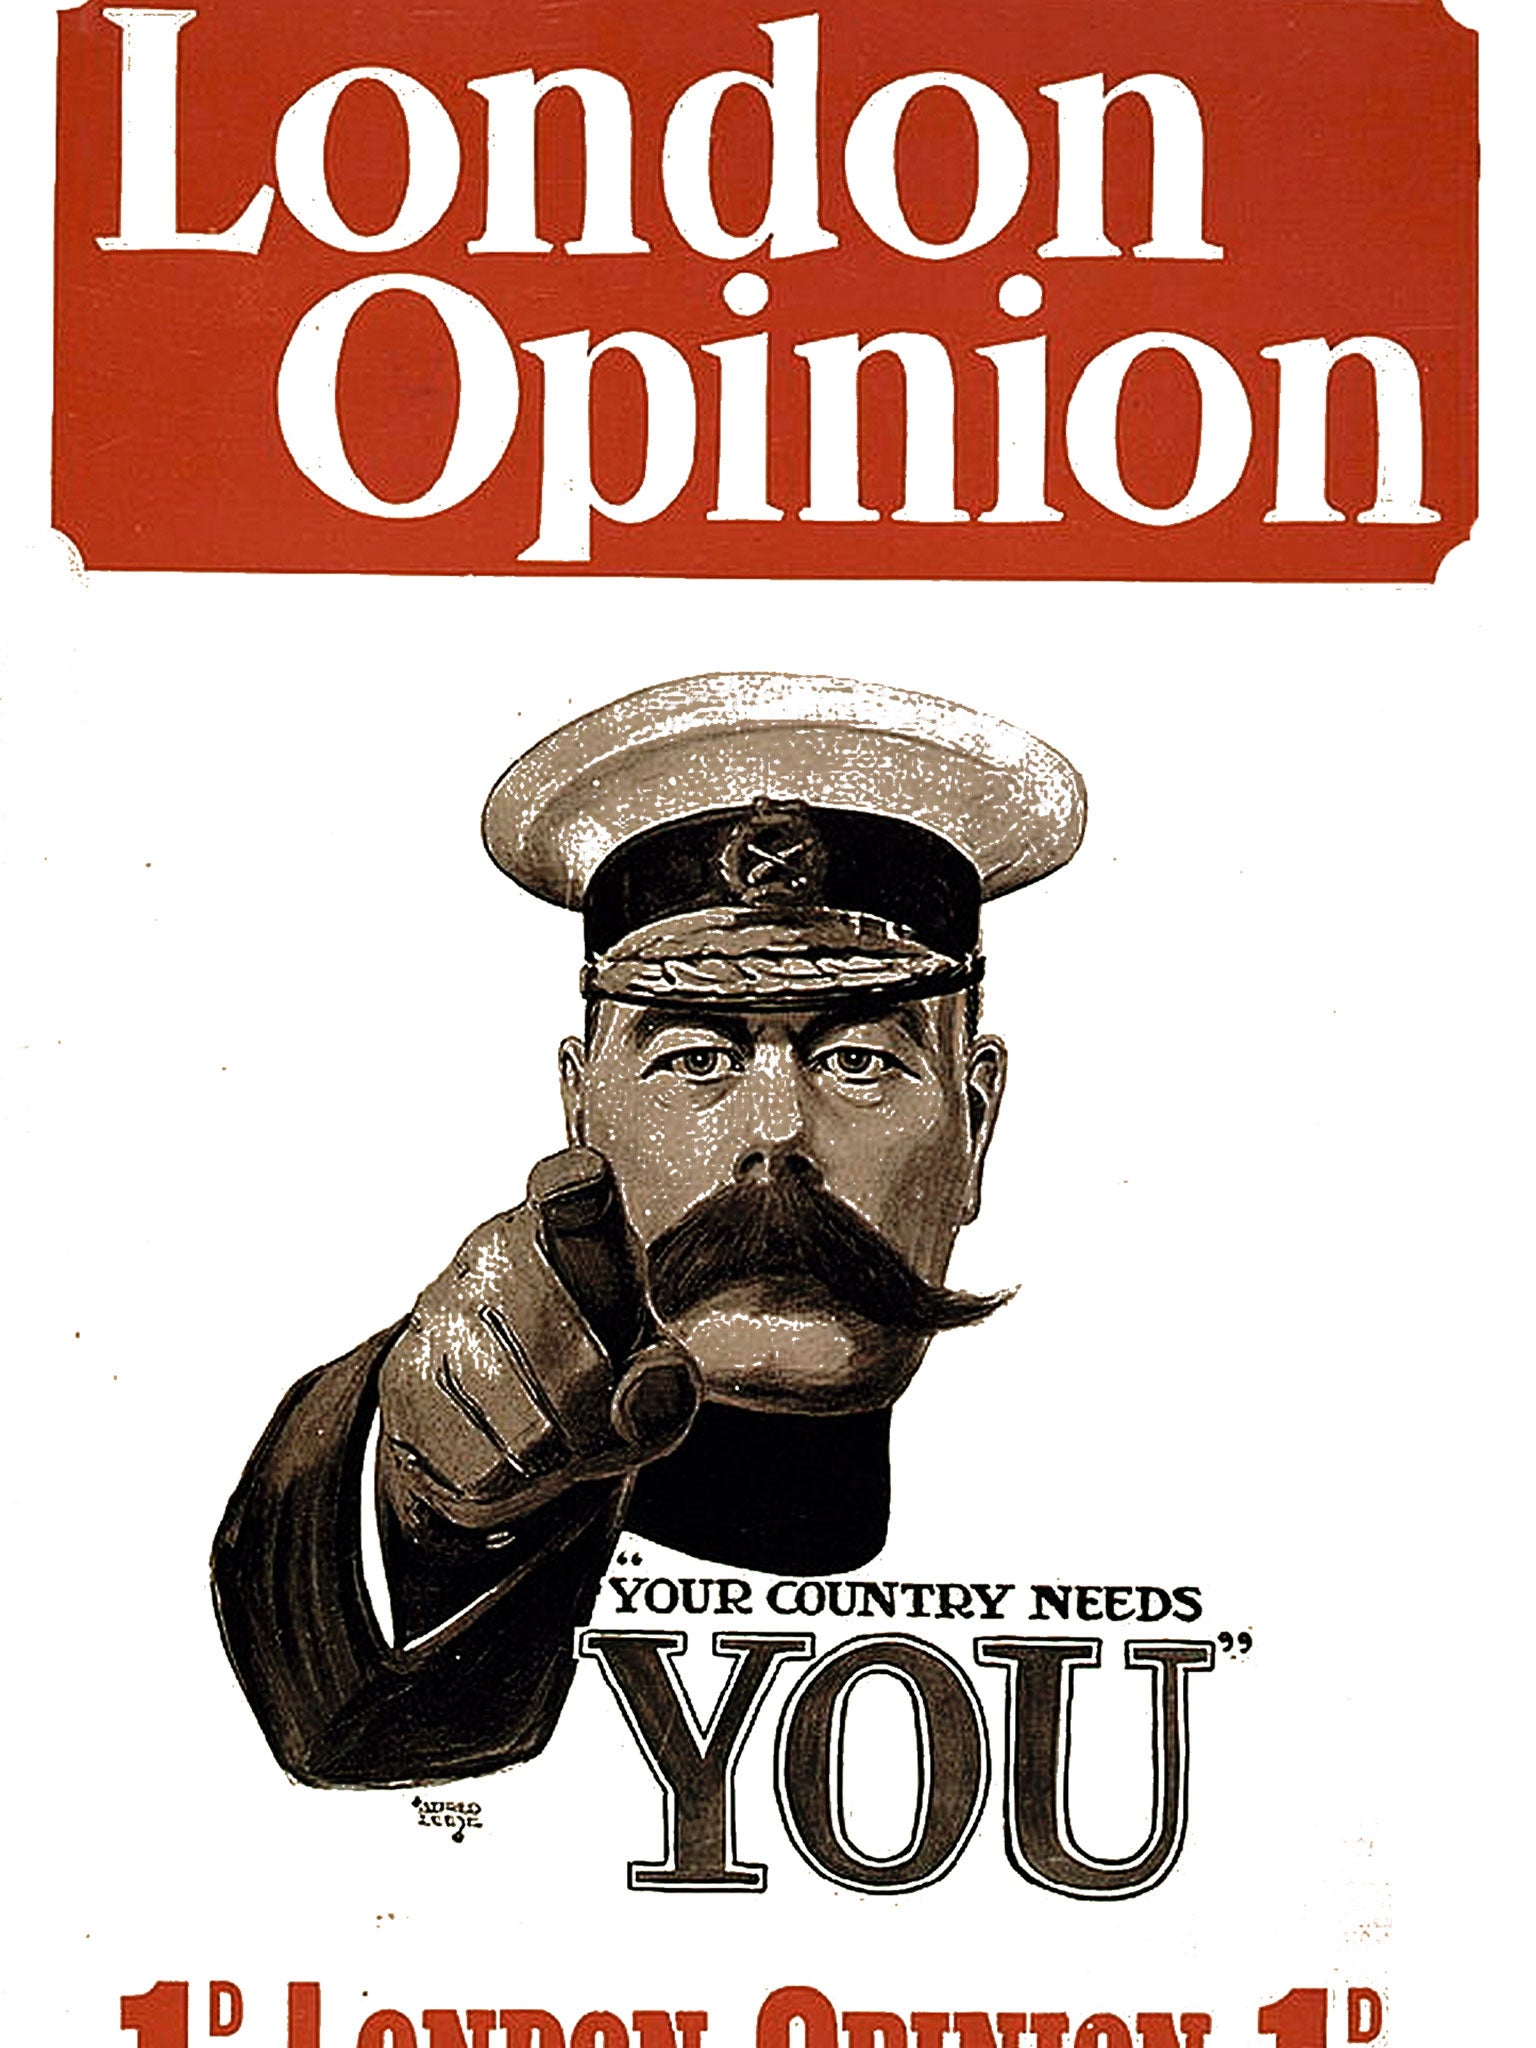 The iconic 'your country needs you' image was thought to have inspired men to fight in World War II